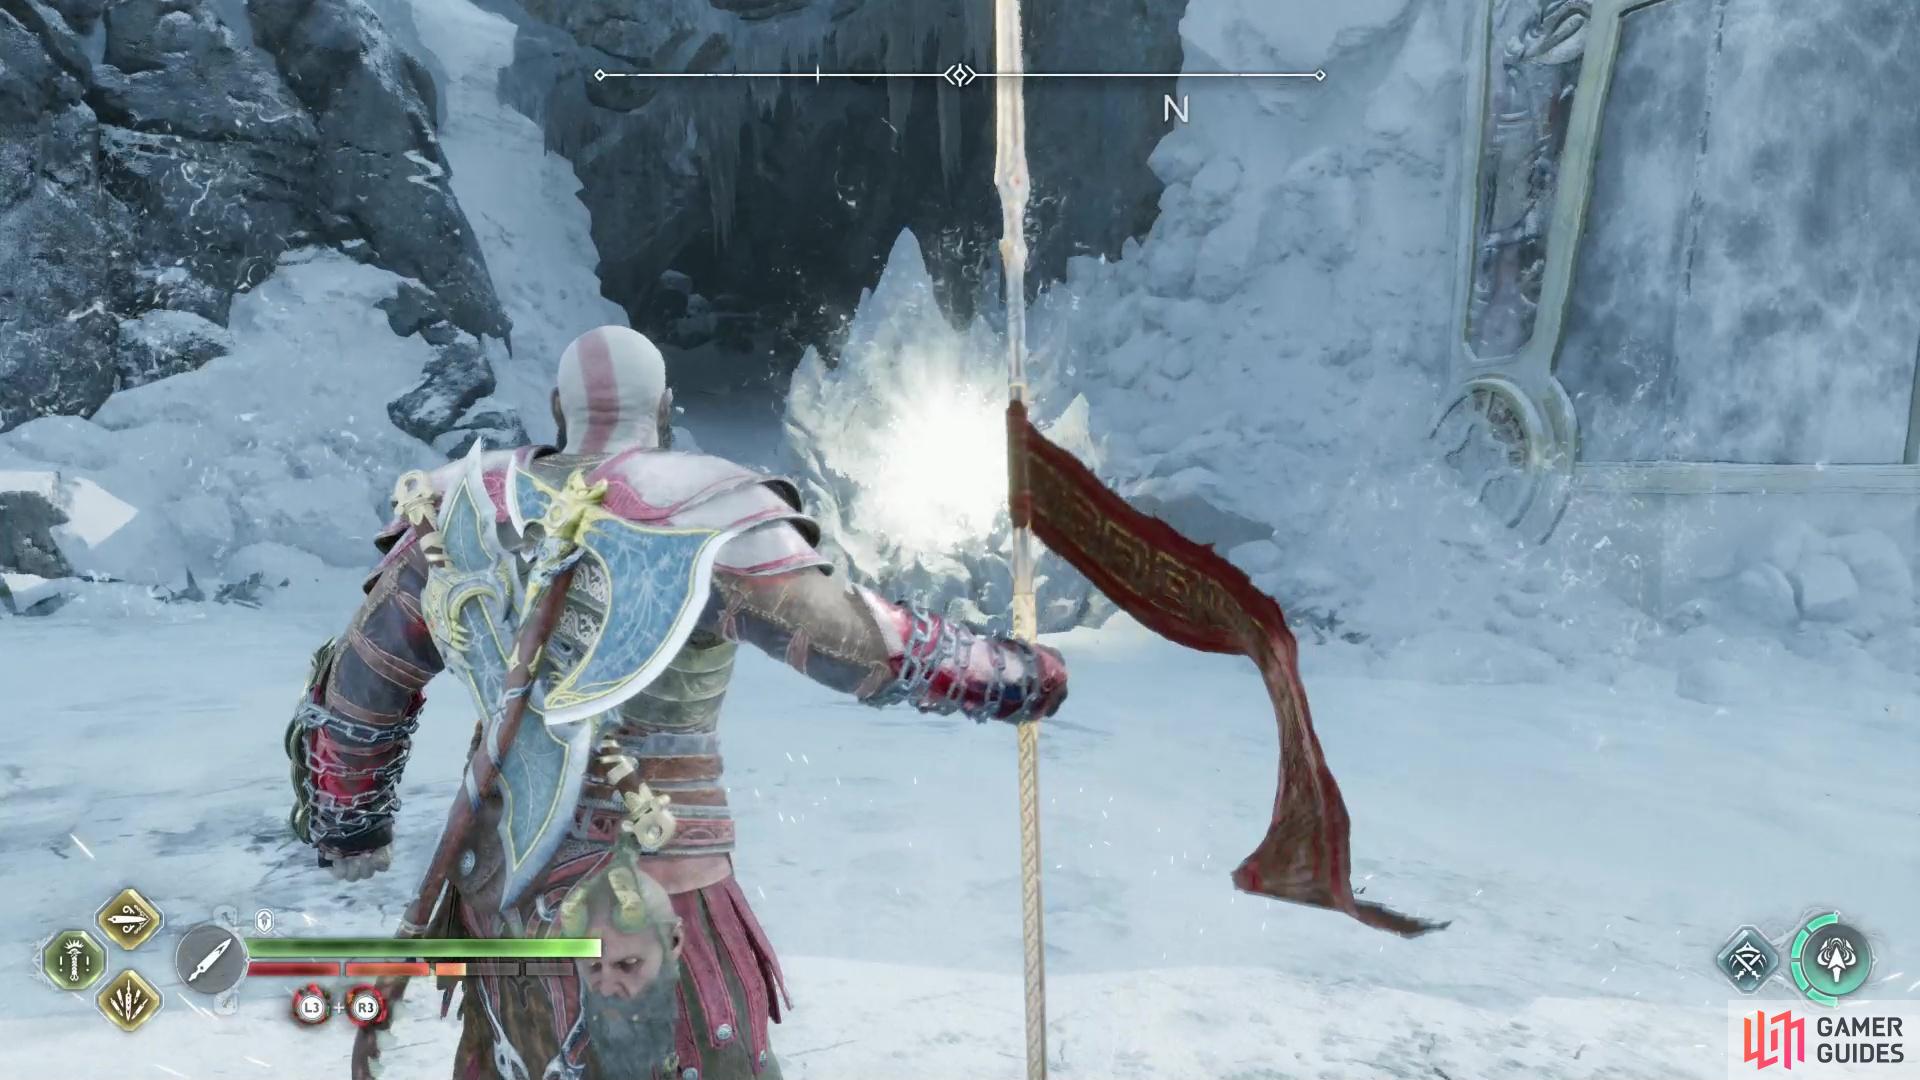 Destroy some ice with the Draupnir Spear,